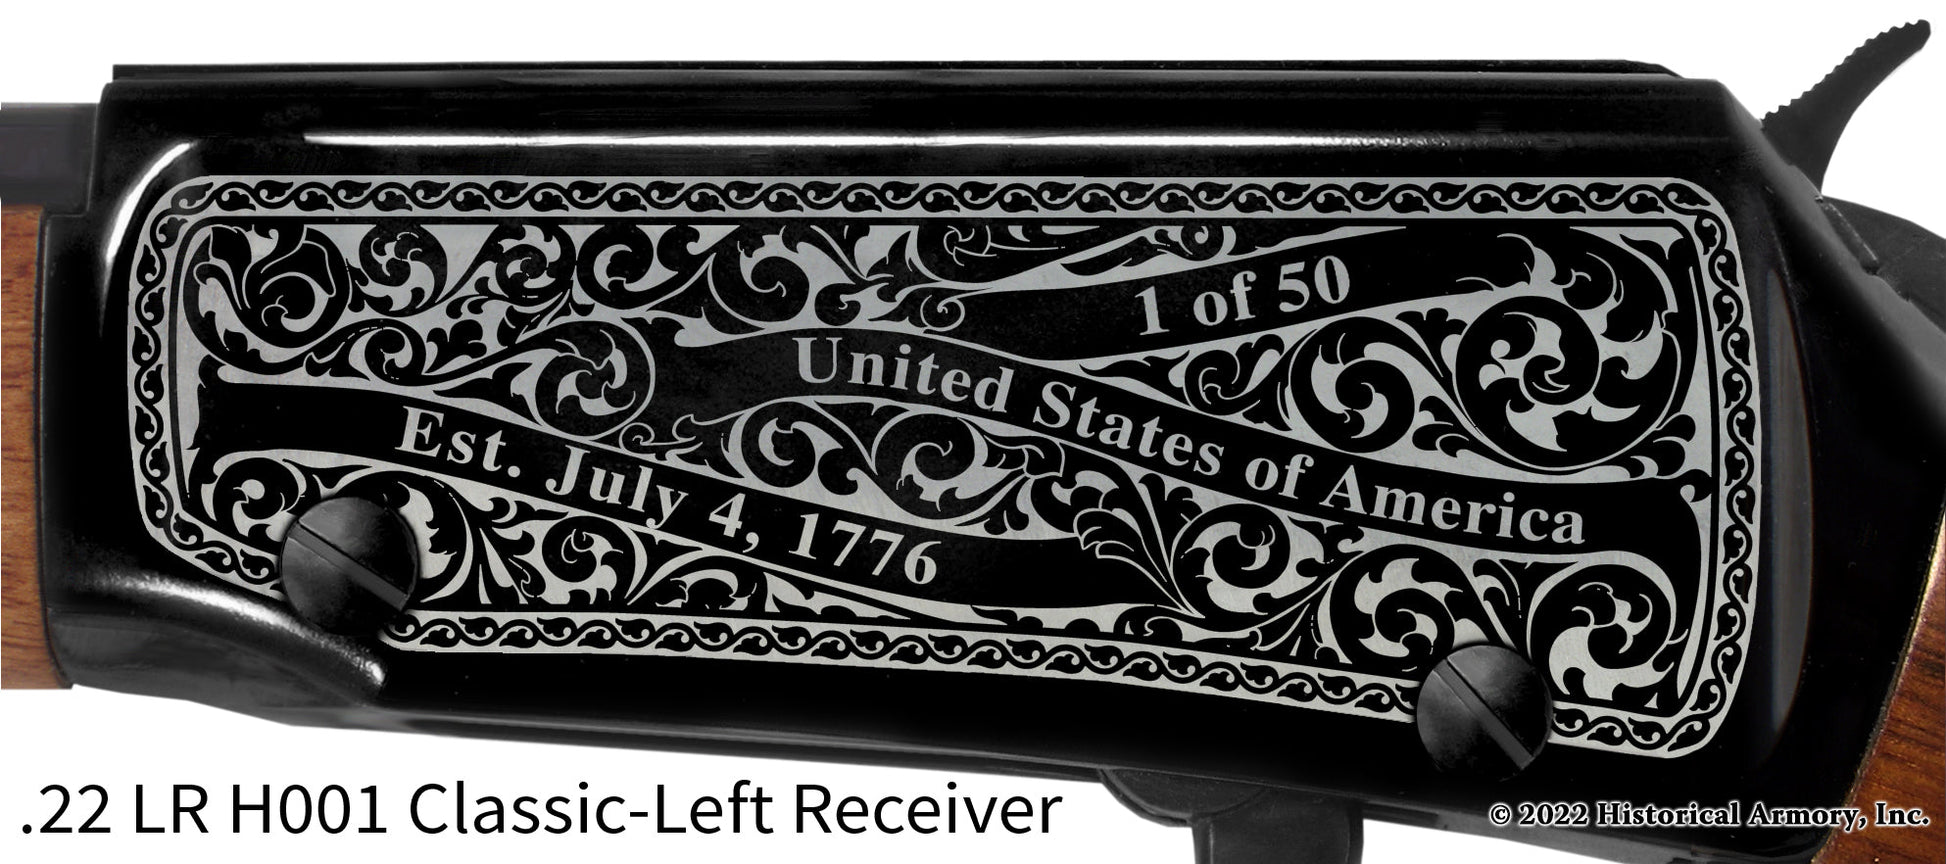 Park County Montana Engraved Henry H001 Rifle